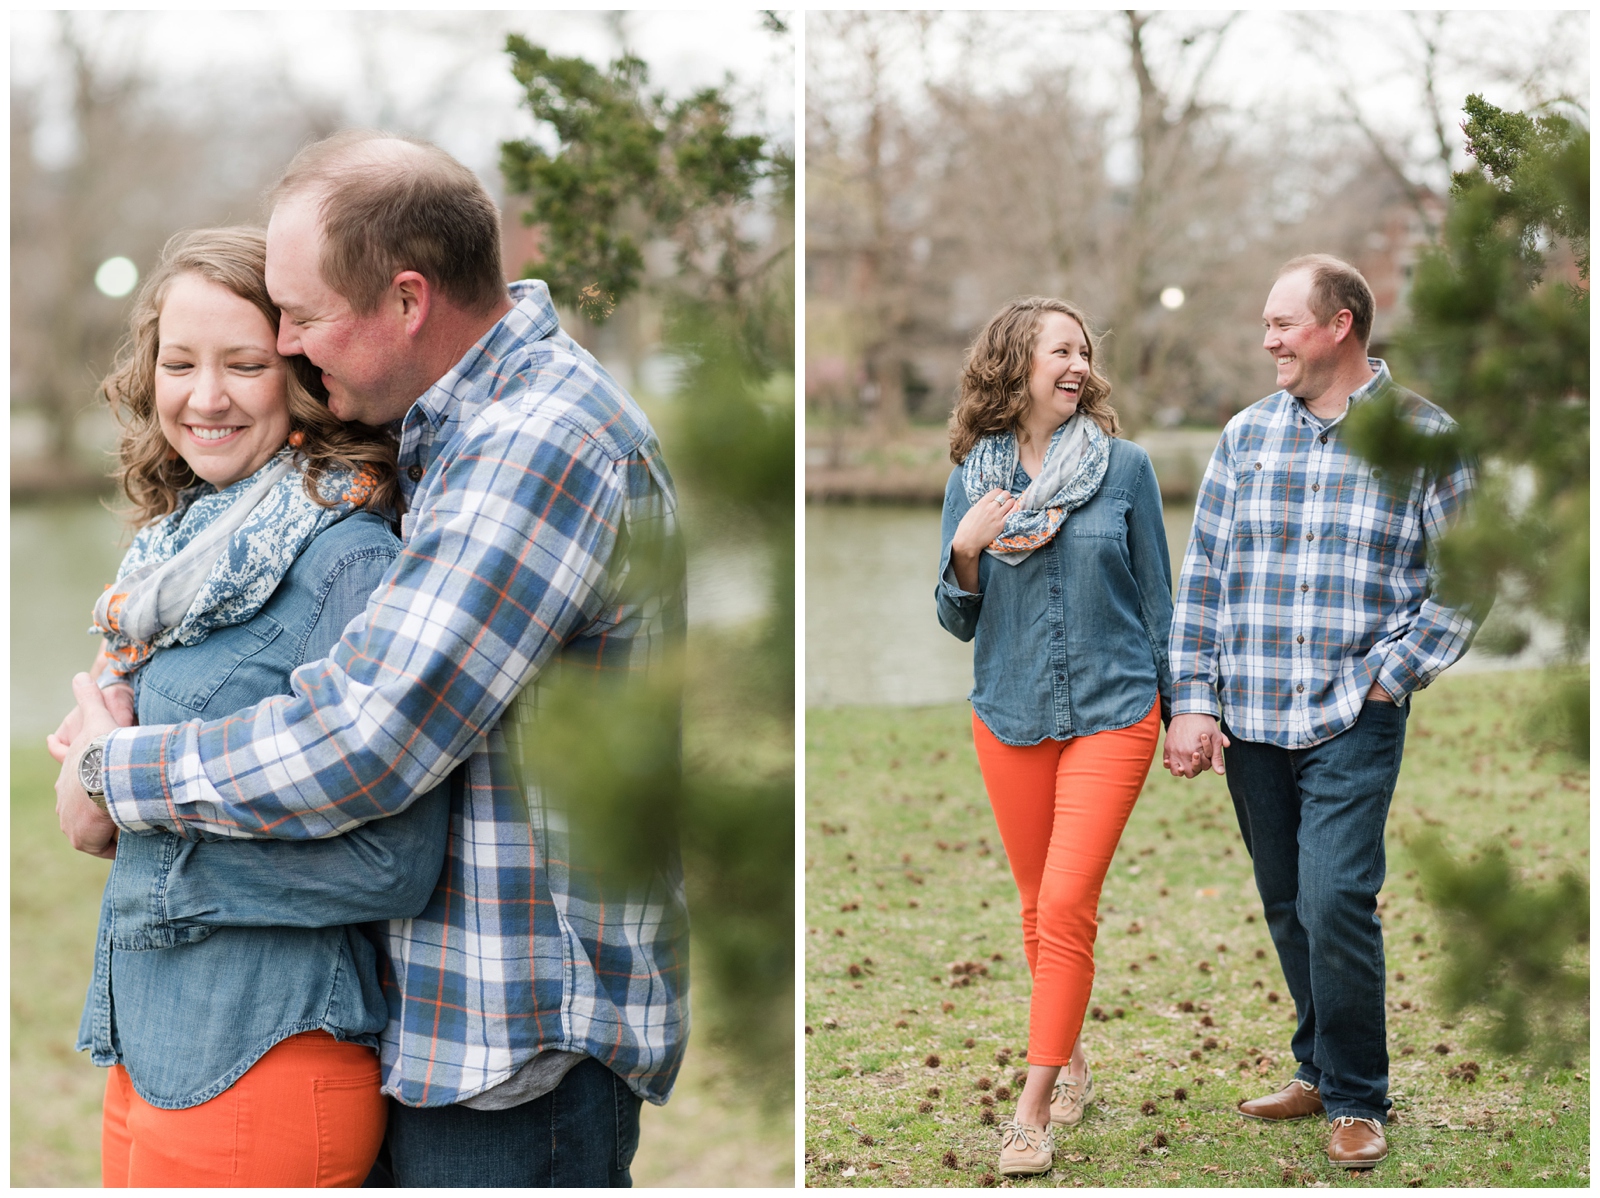 a bride and groom laughing at each other and walking by a pond in the right image and the left image has an engaged couple hugging each other smiling 